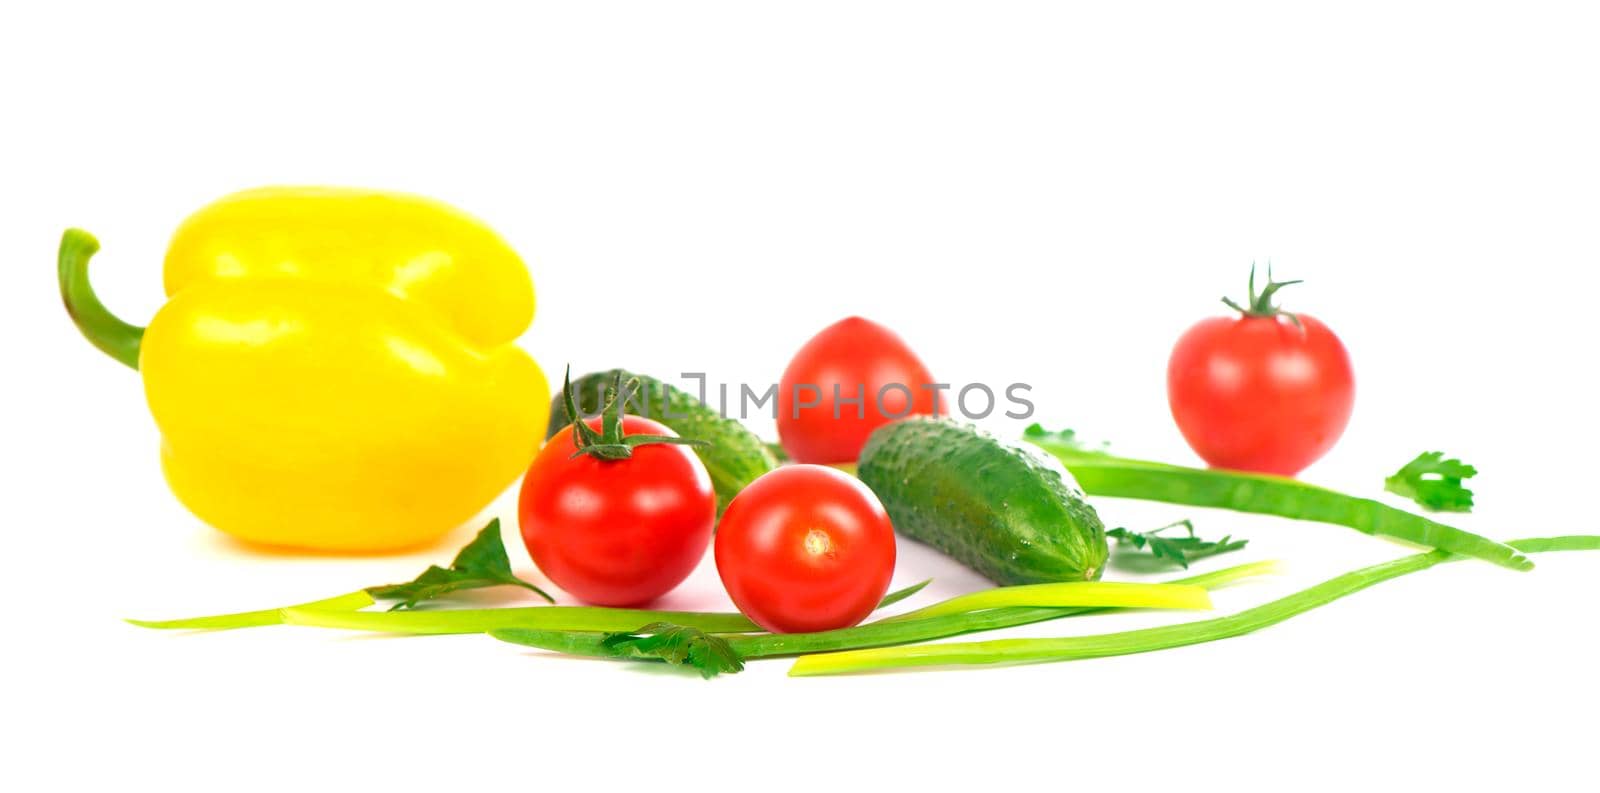 Vegetables on the white background. Composition of vegetables on the white background by aprilphoto